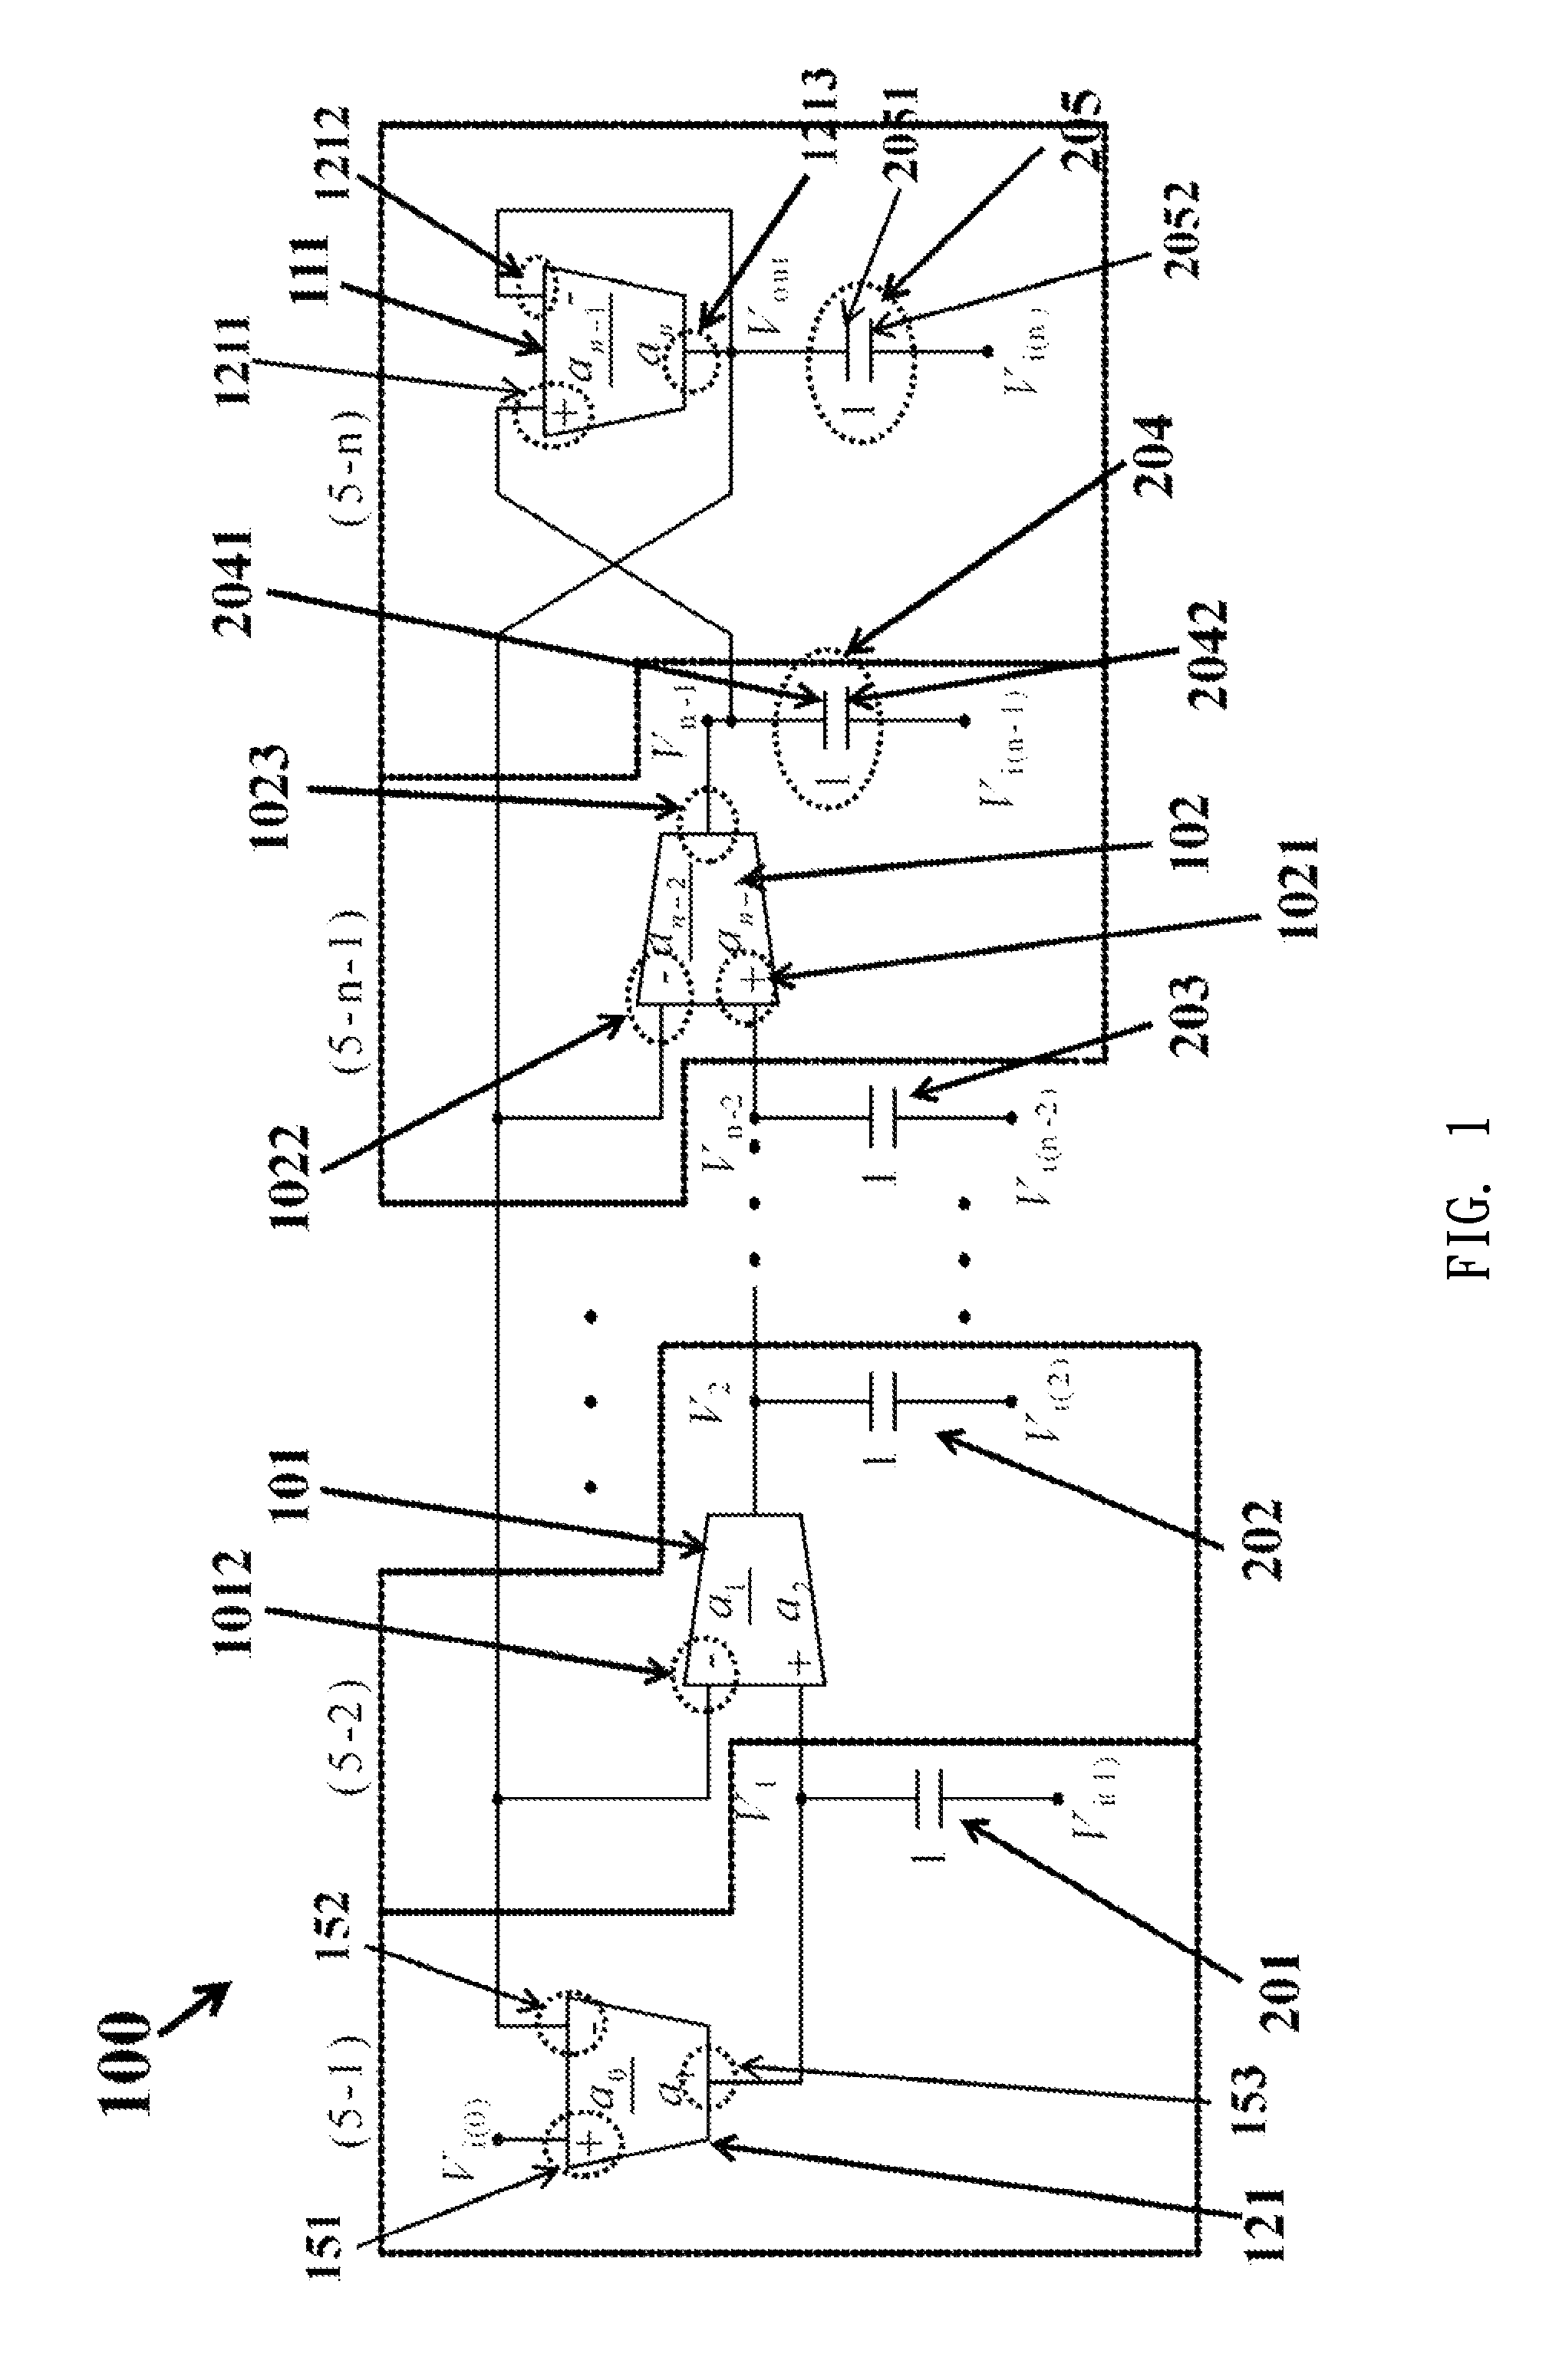 Complimentary single-ended-input OTA-C universal filter structures